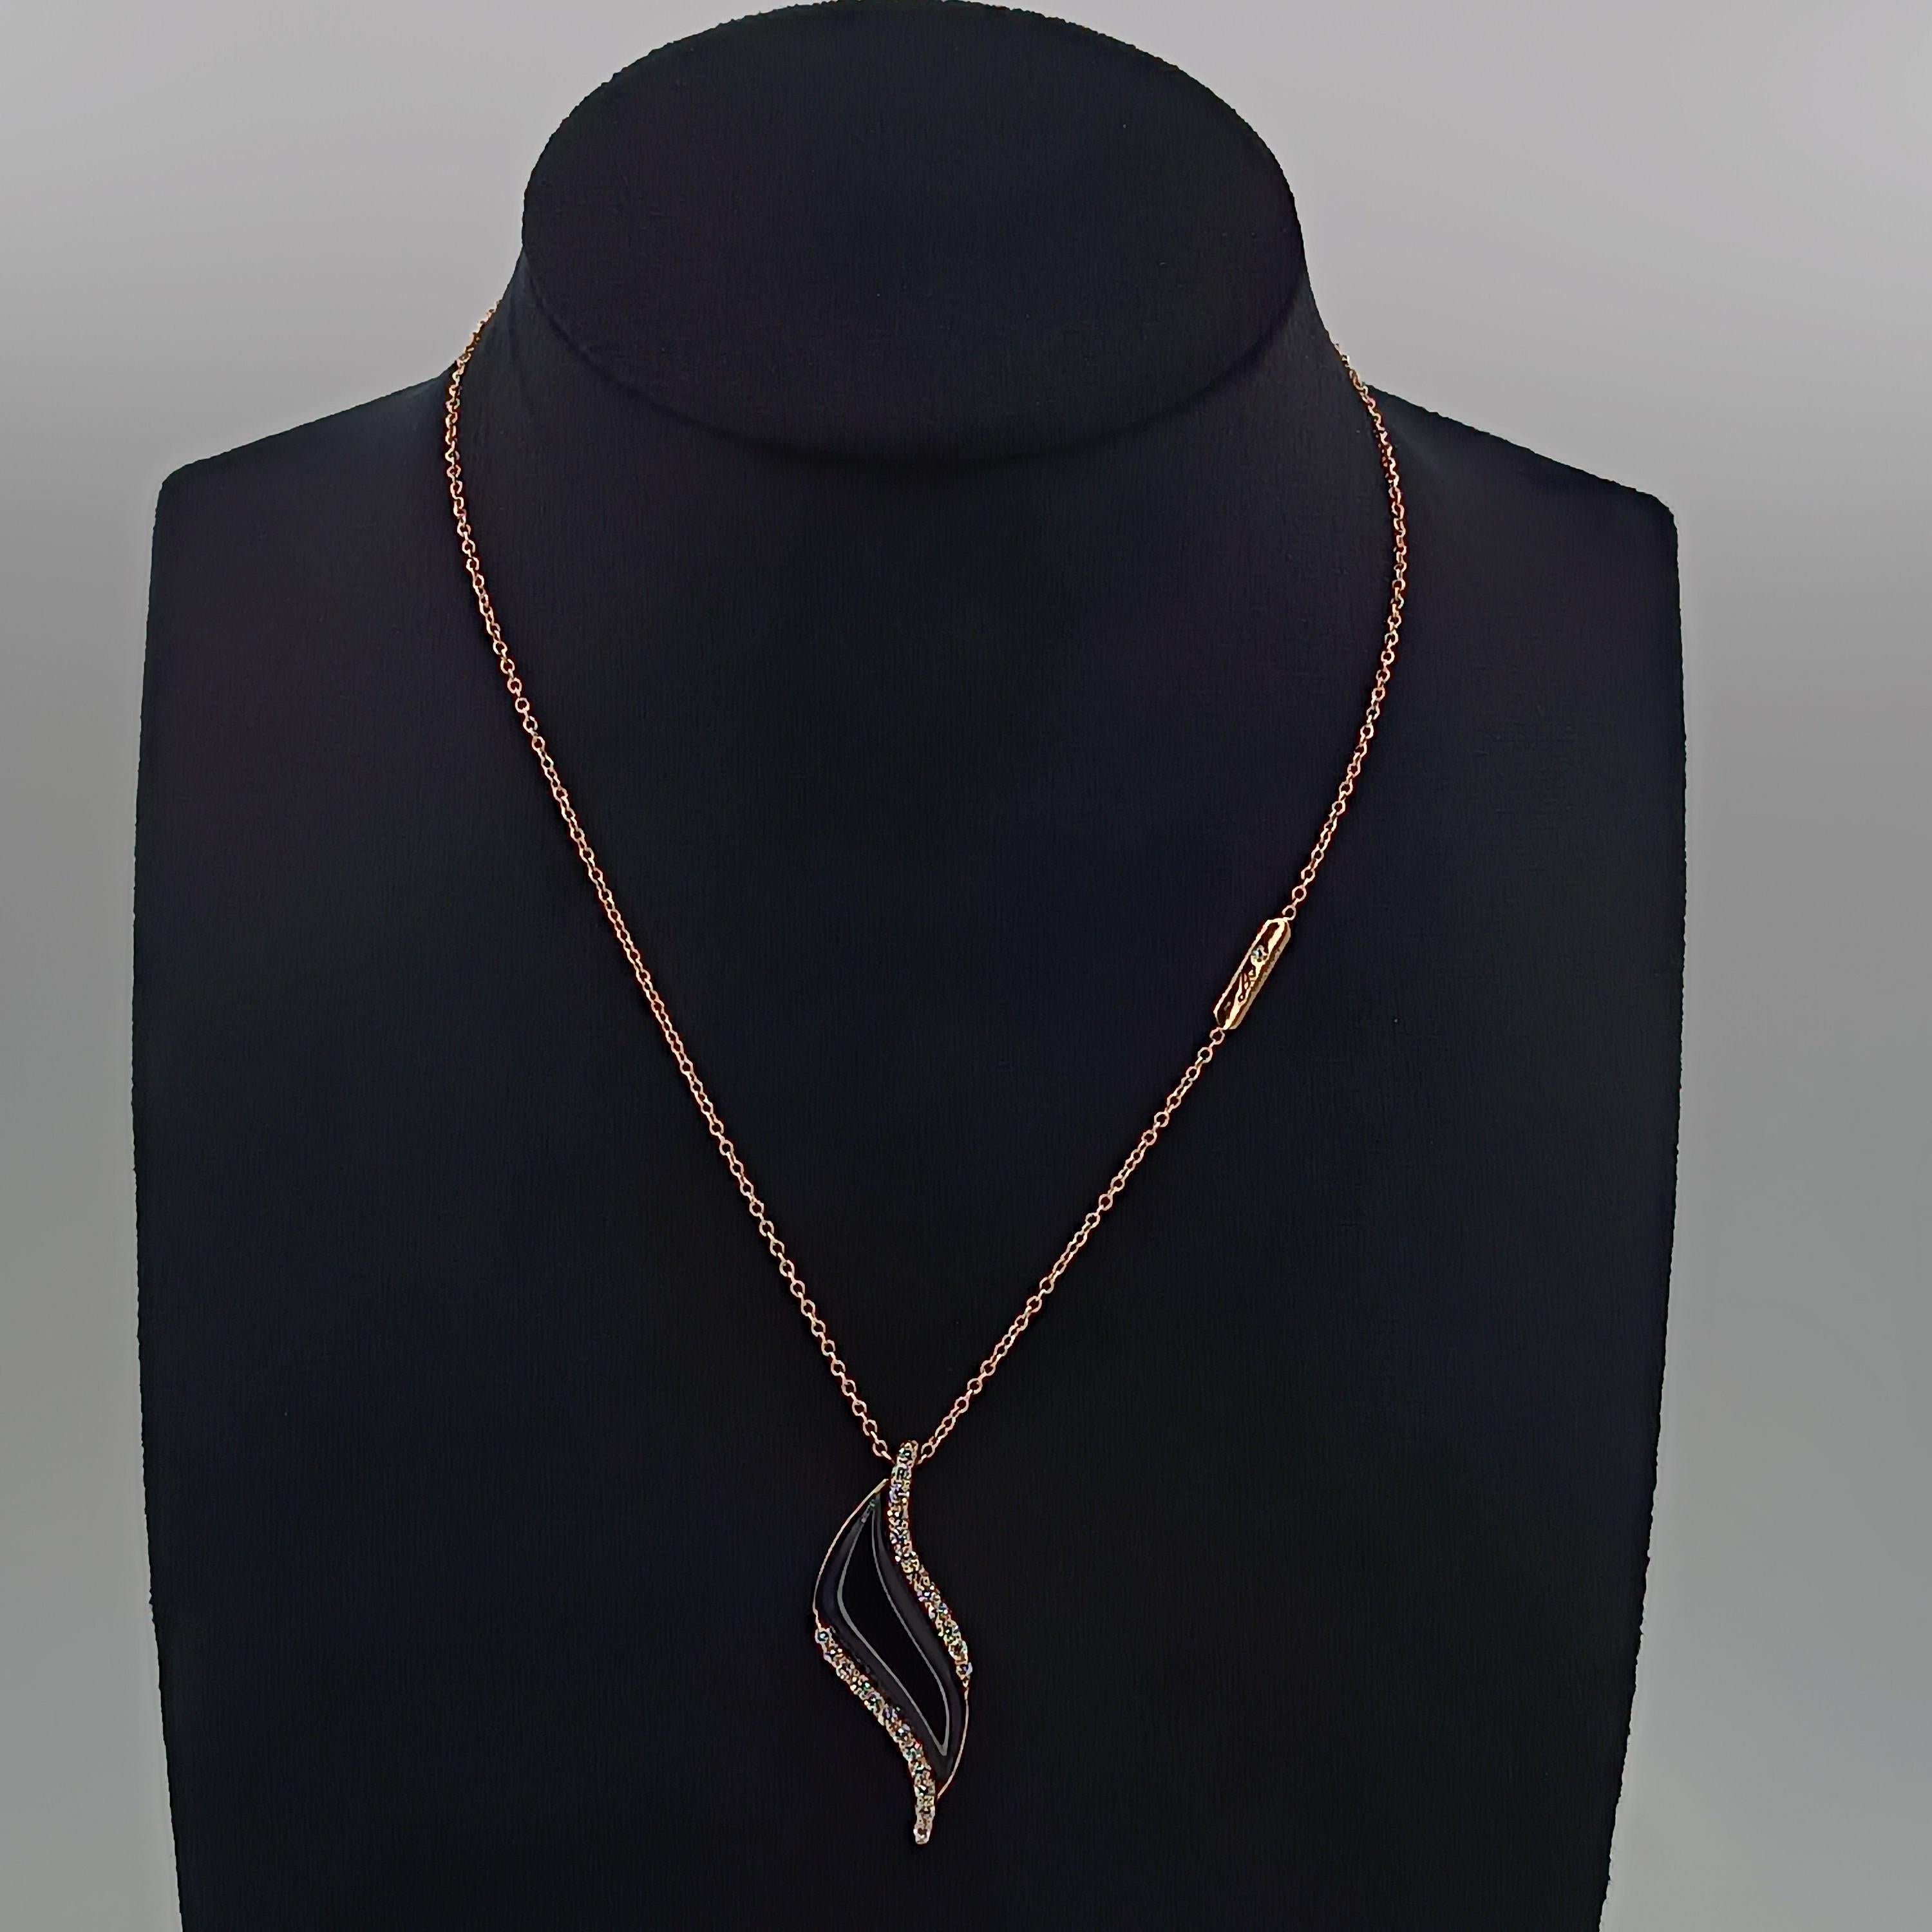 This wonderful Leo Milano pendant from our Conchetta  collection shows in every detail a very complicated yet perfectly done workmanship. The pendant and the chain are in 18 carat rose gold with onyx . The object weights 8.88 grams the total